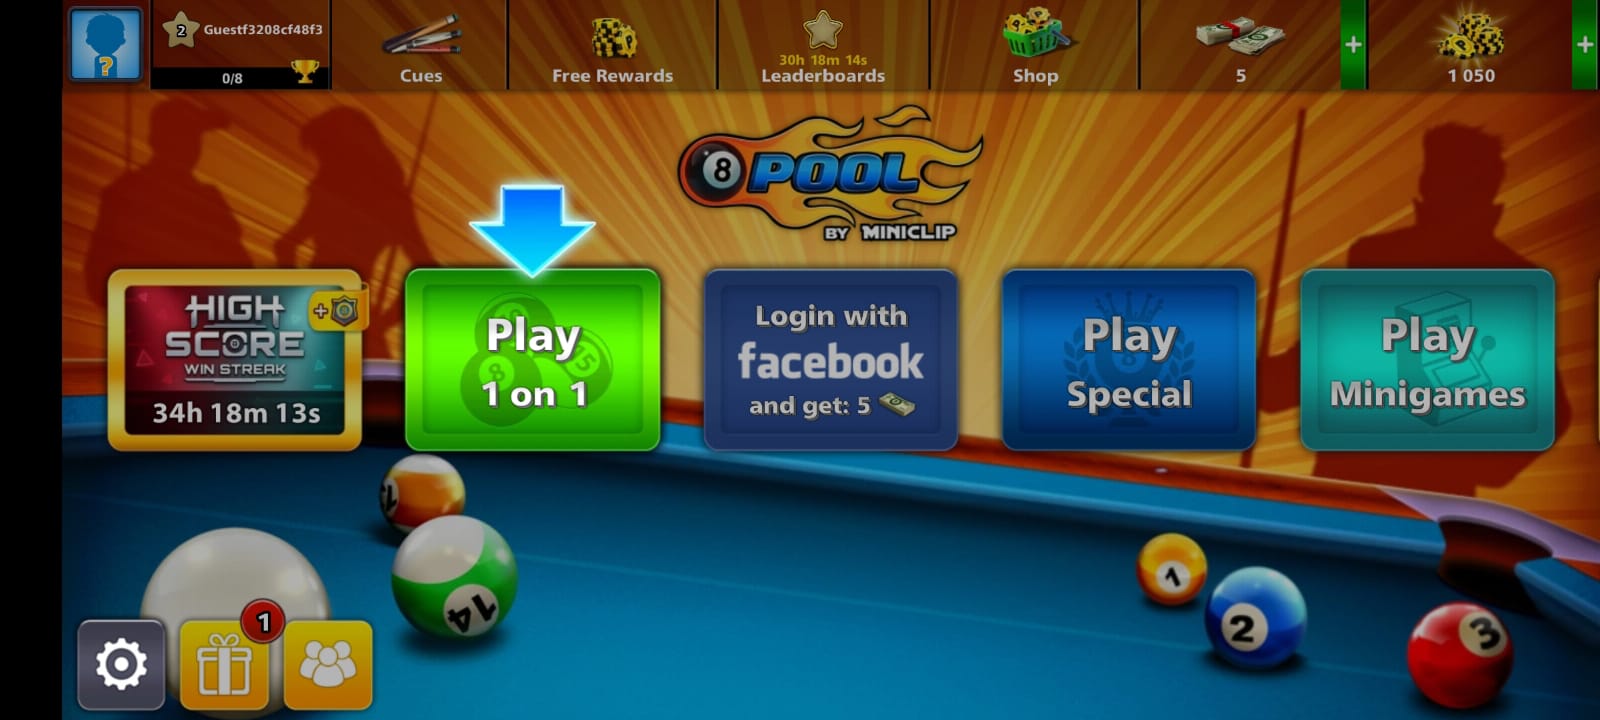 Download 8 Ball Pool MOD APK v5.14.3 for Android